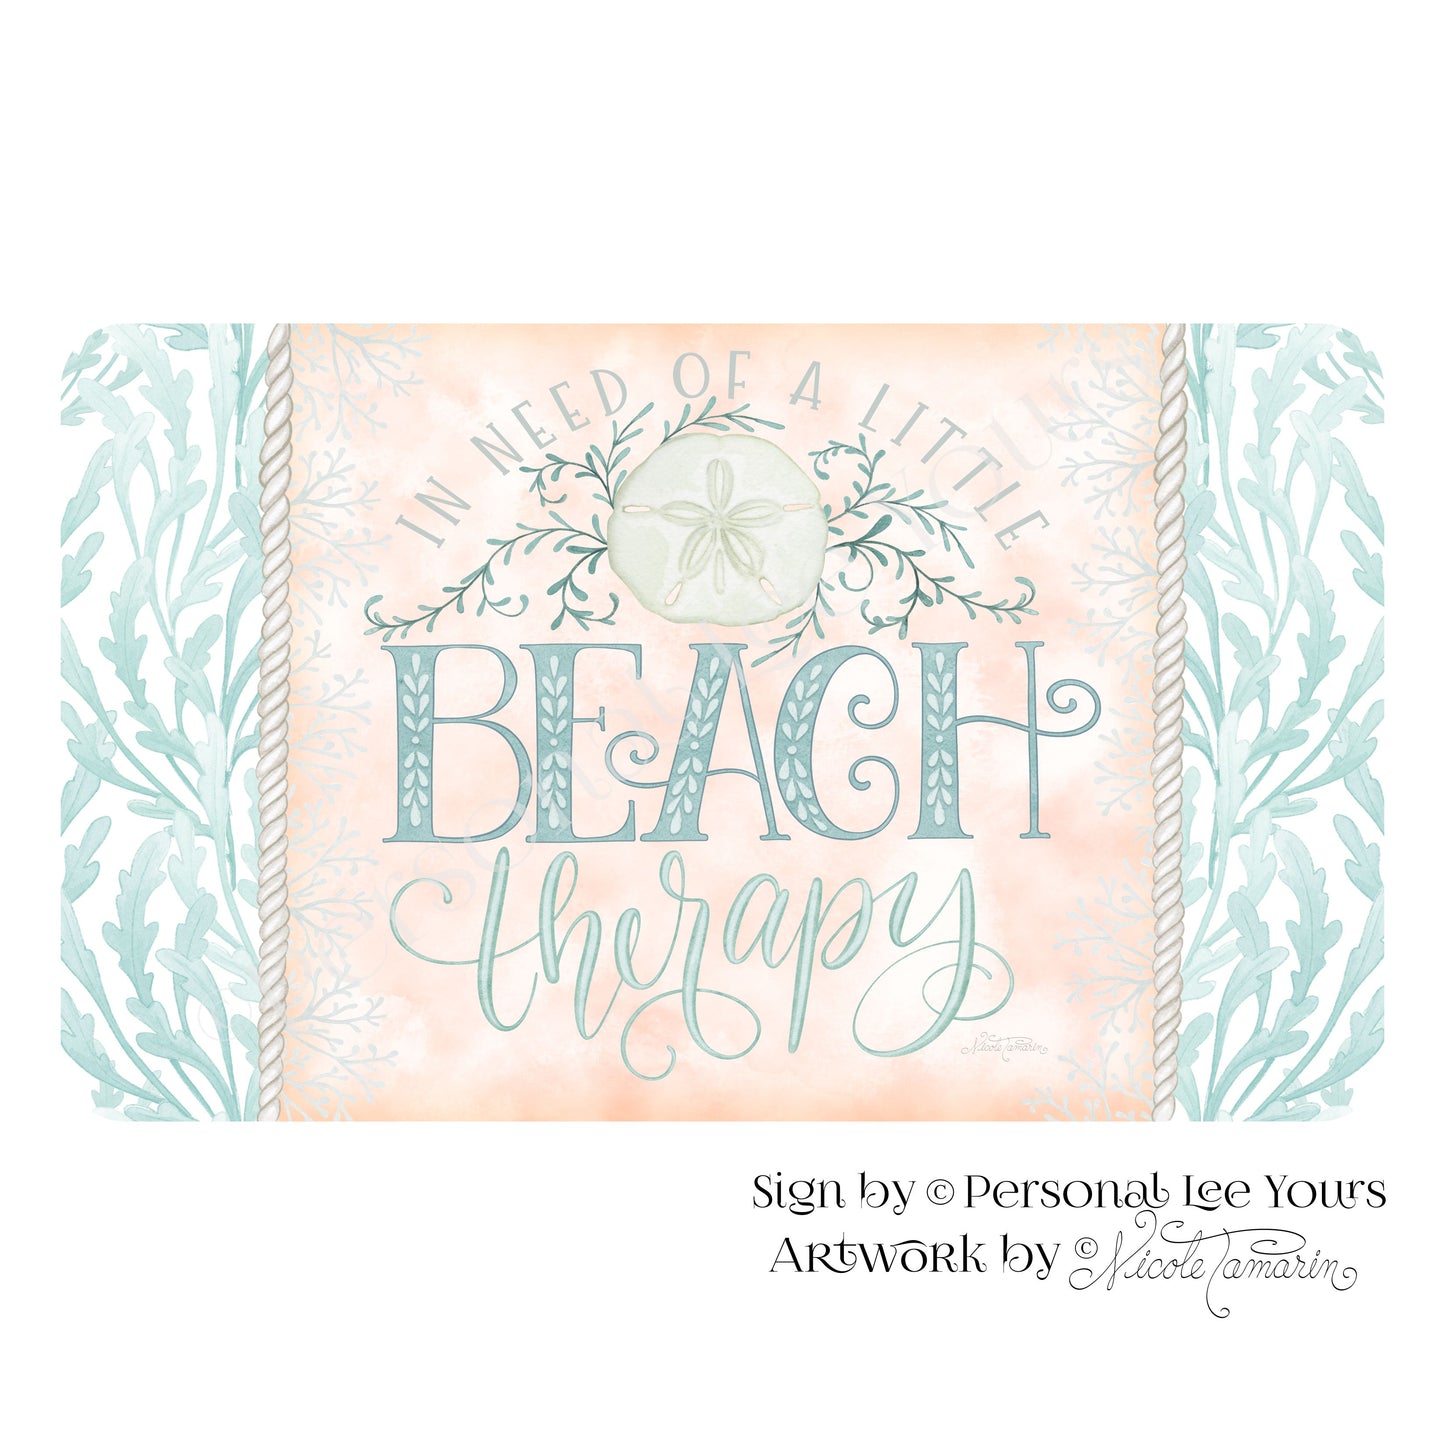 Nicole Tamarin Exclusive Sign * Beach Therapy * Horizontal * 4 Sizes * Lightweight Metal